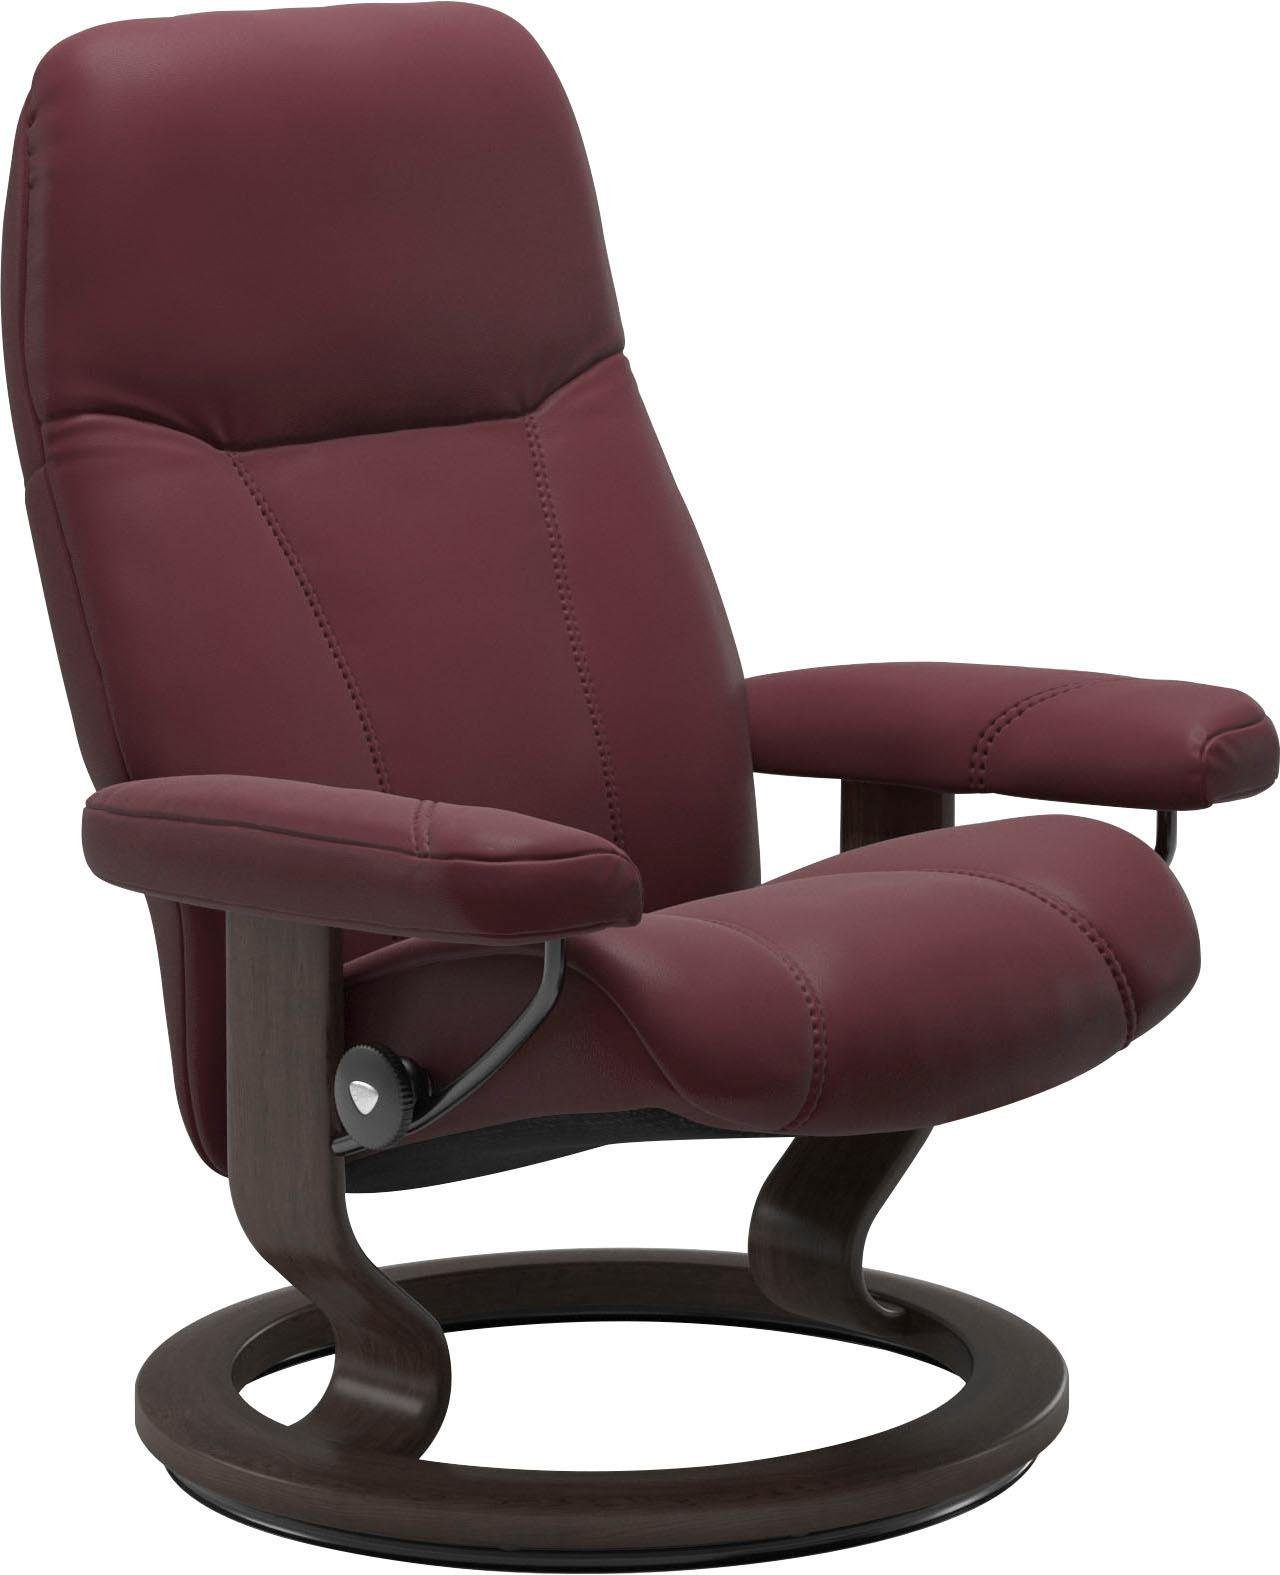 Stressless® Gestell Wenge Classic Relaxsessel mit Base, Consul, Größe M,